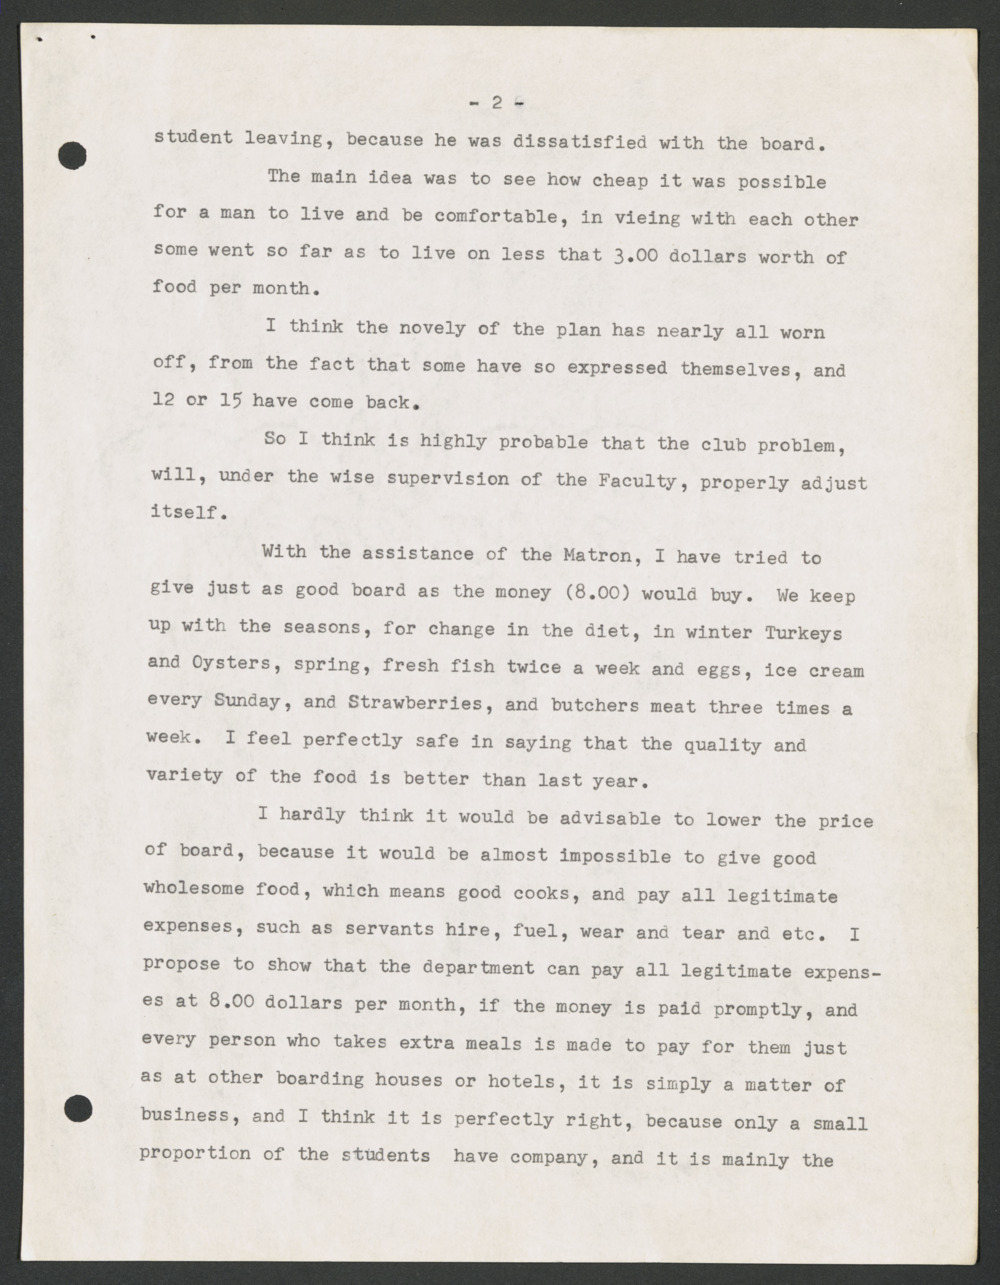 A scan of the second page of a typed letter from B.S. Skinner to President Holladay, dated June 12th, 1895.